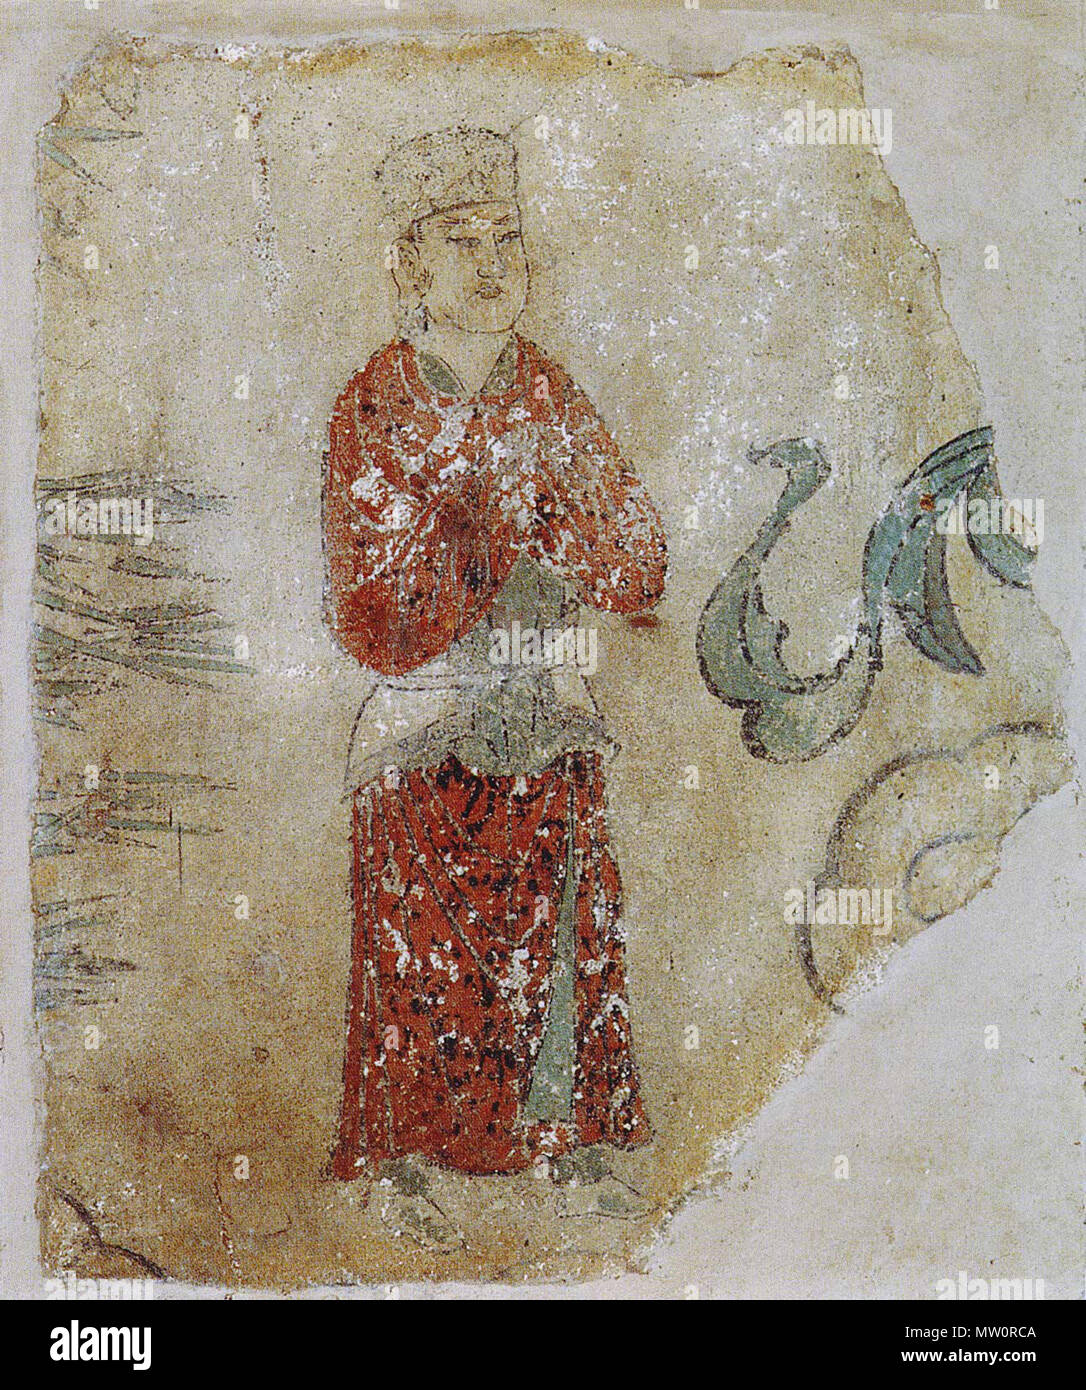 . Praying man (?), China, Gansu or Ningxia (?), 10th/11th century. Height 60 cm, width 50 cm. Fragment of a wall painting. Musée national des arts asiatiques - Guimet, Paris, Inv. no. MA 480. If one accepts that the painting is from Ningxia or Gansu, the man might be a Tangut. 10th/11th century. unknown / (of the reproduction) Musée national des arts asiatiques - Guimet, Paris 500 PrayingTangutMan Stock Photo